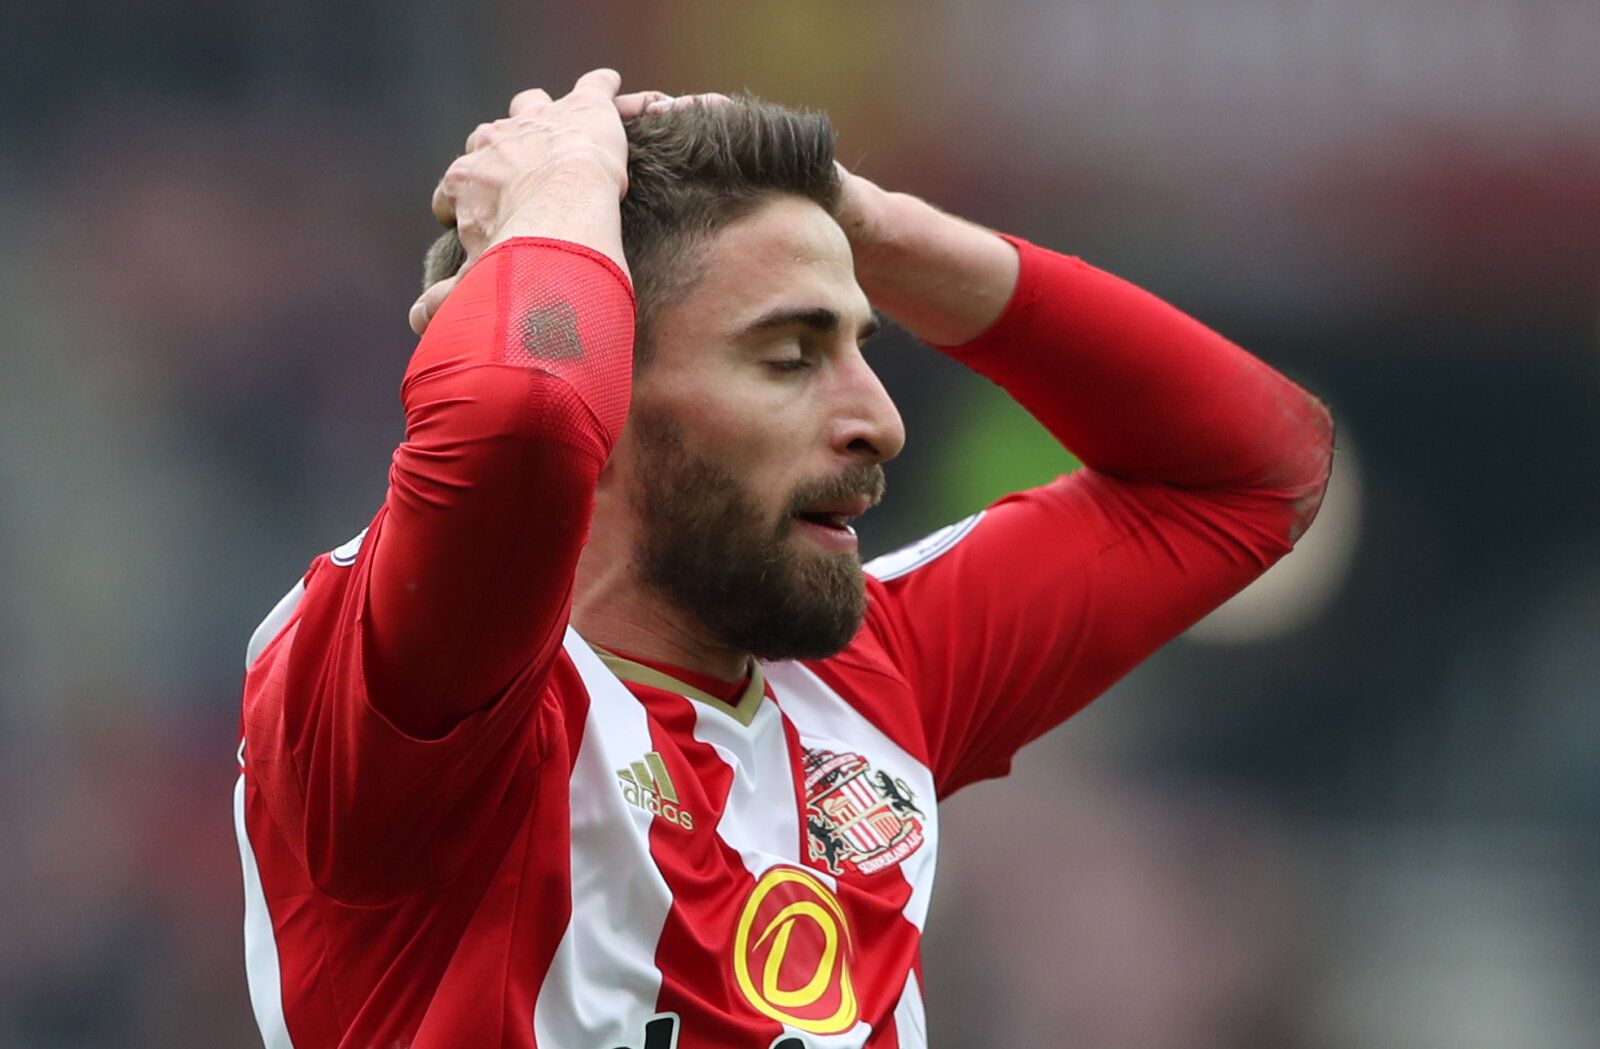 Britain Football Soccer - Sunderland v AFC Bournemouth - Premier League - Stadium of Light - 29/4/17 Sunderland's Fabio Borini looks dejected  Reuters / Scott Heppell Livepic EDITORIAL USE ONLY. No use with unauthorized audio, video, data, fixture lists, club/league logos or 